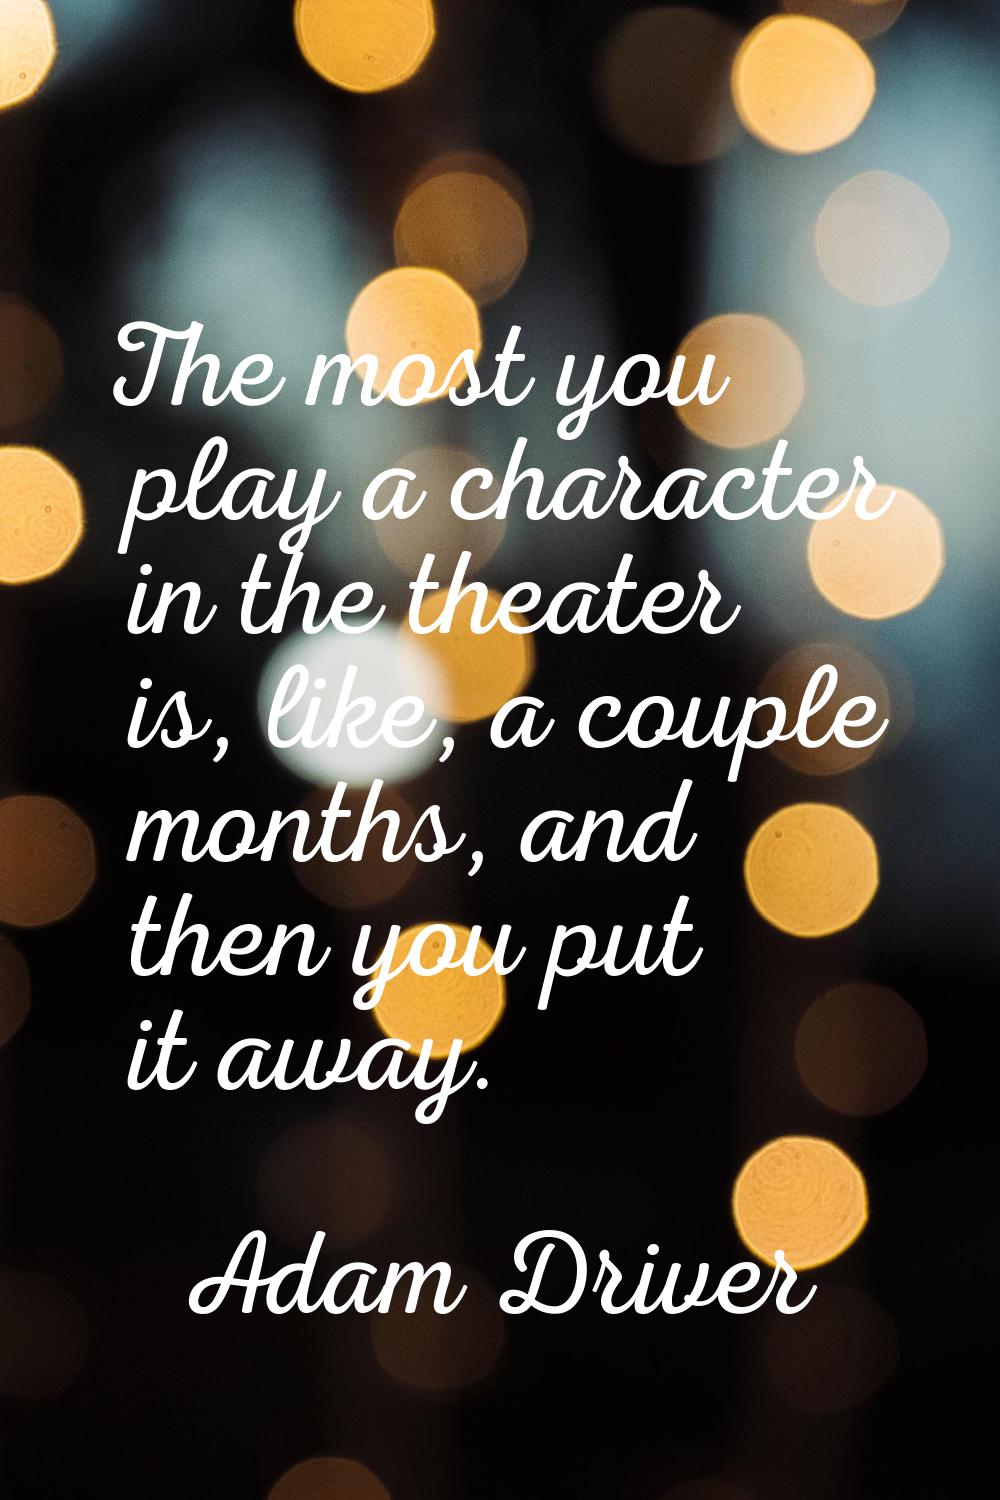 The most you play a character in the theater is, like, a couple months, and then you put it away.